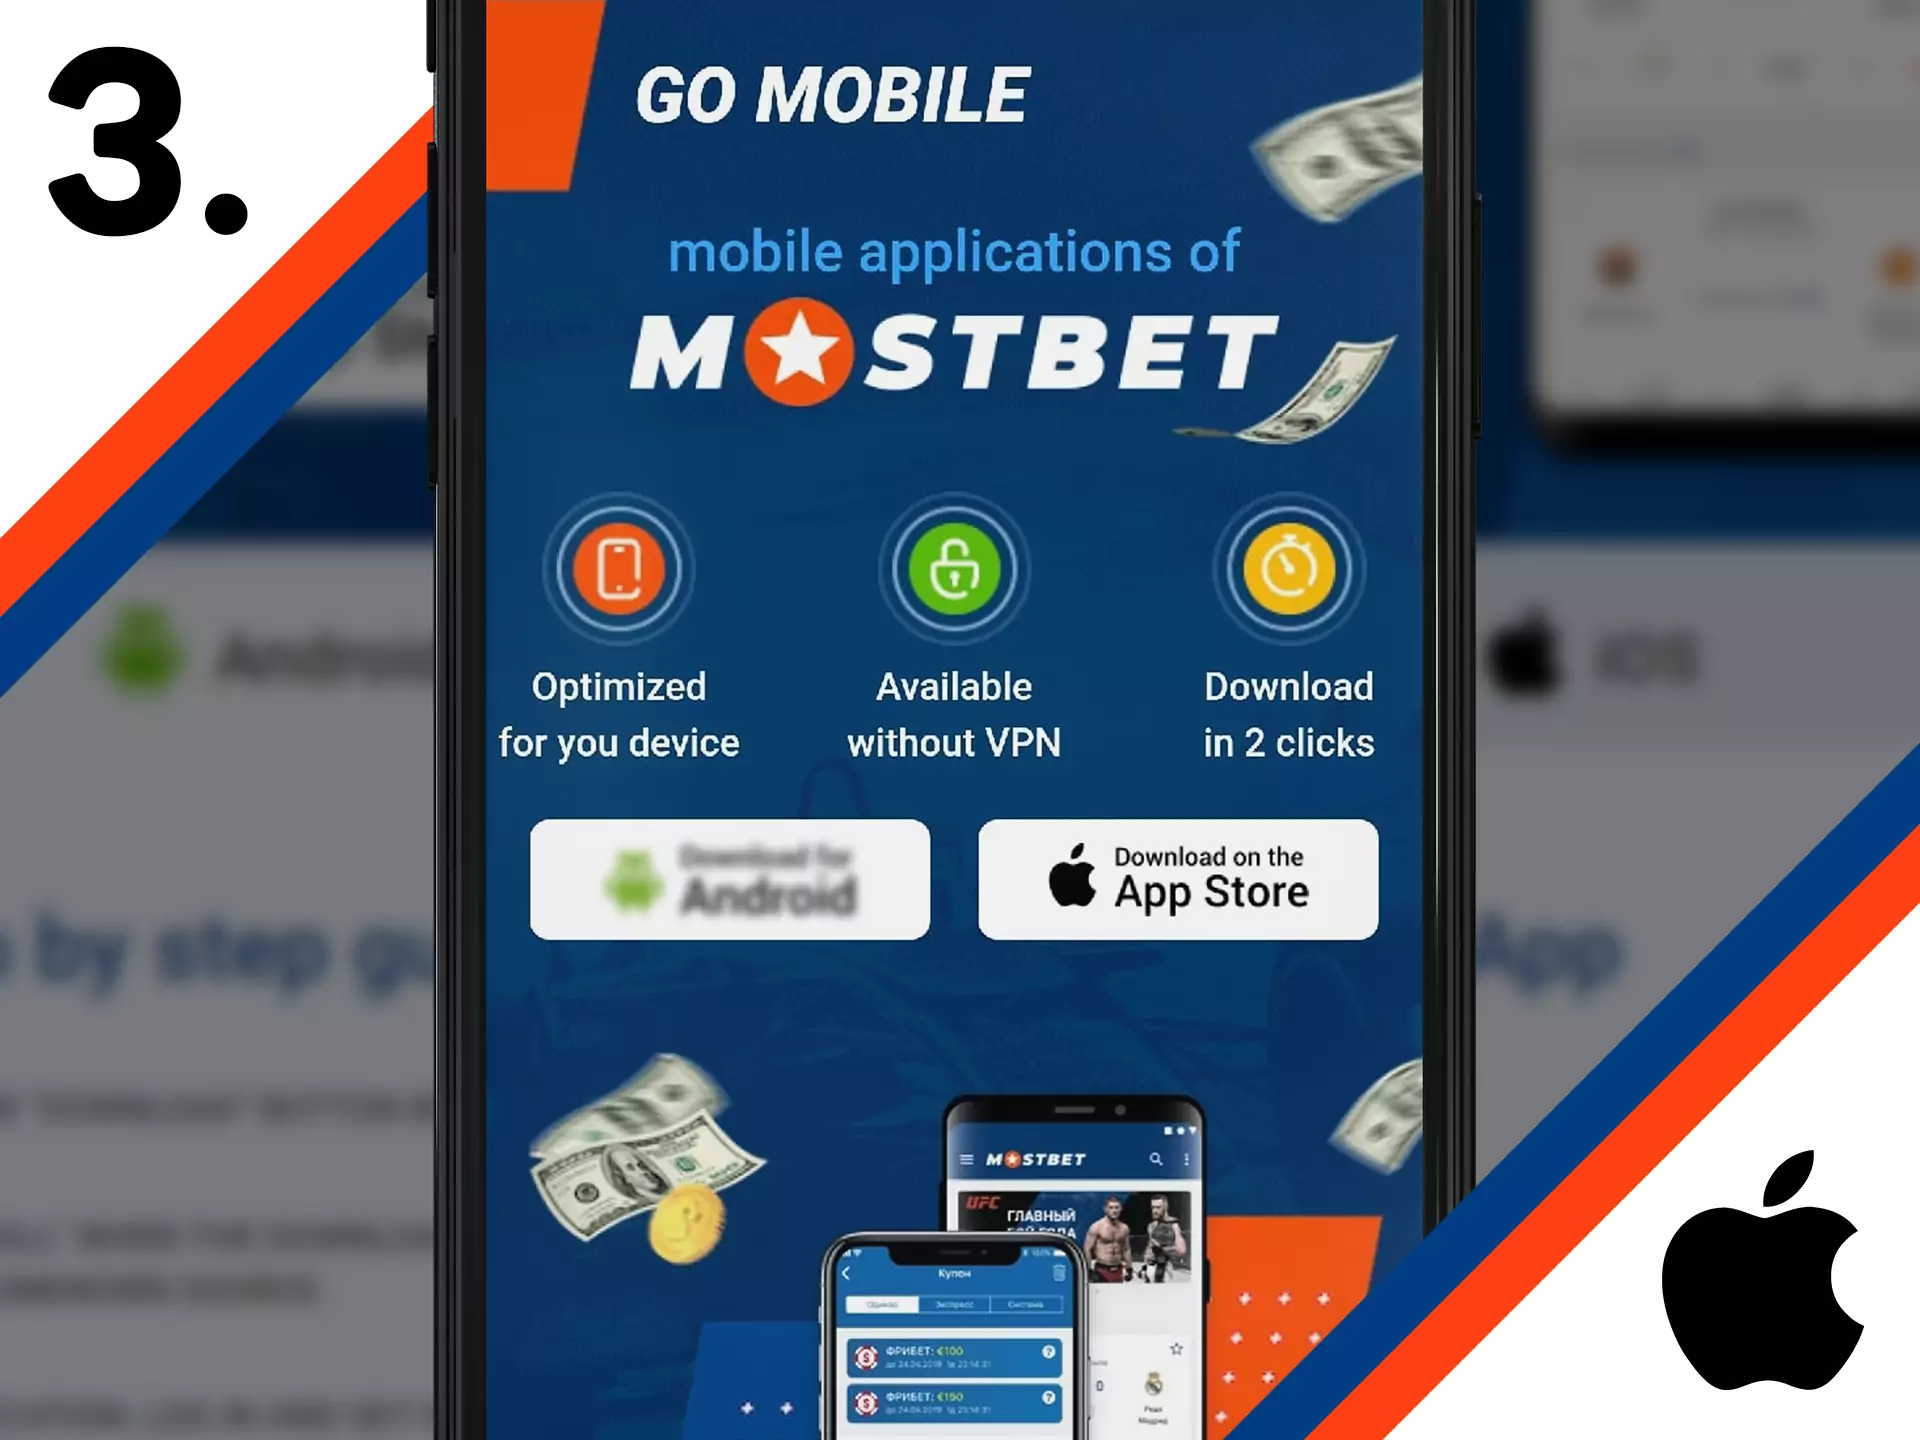 10 Reasons Why Having An Excellent Mostbet mobile application in Germany - download and play Is Not Enough